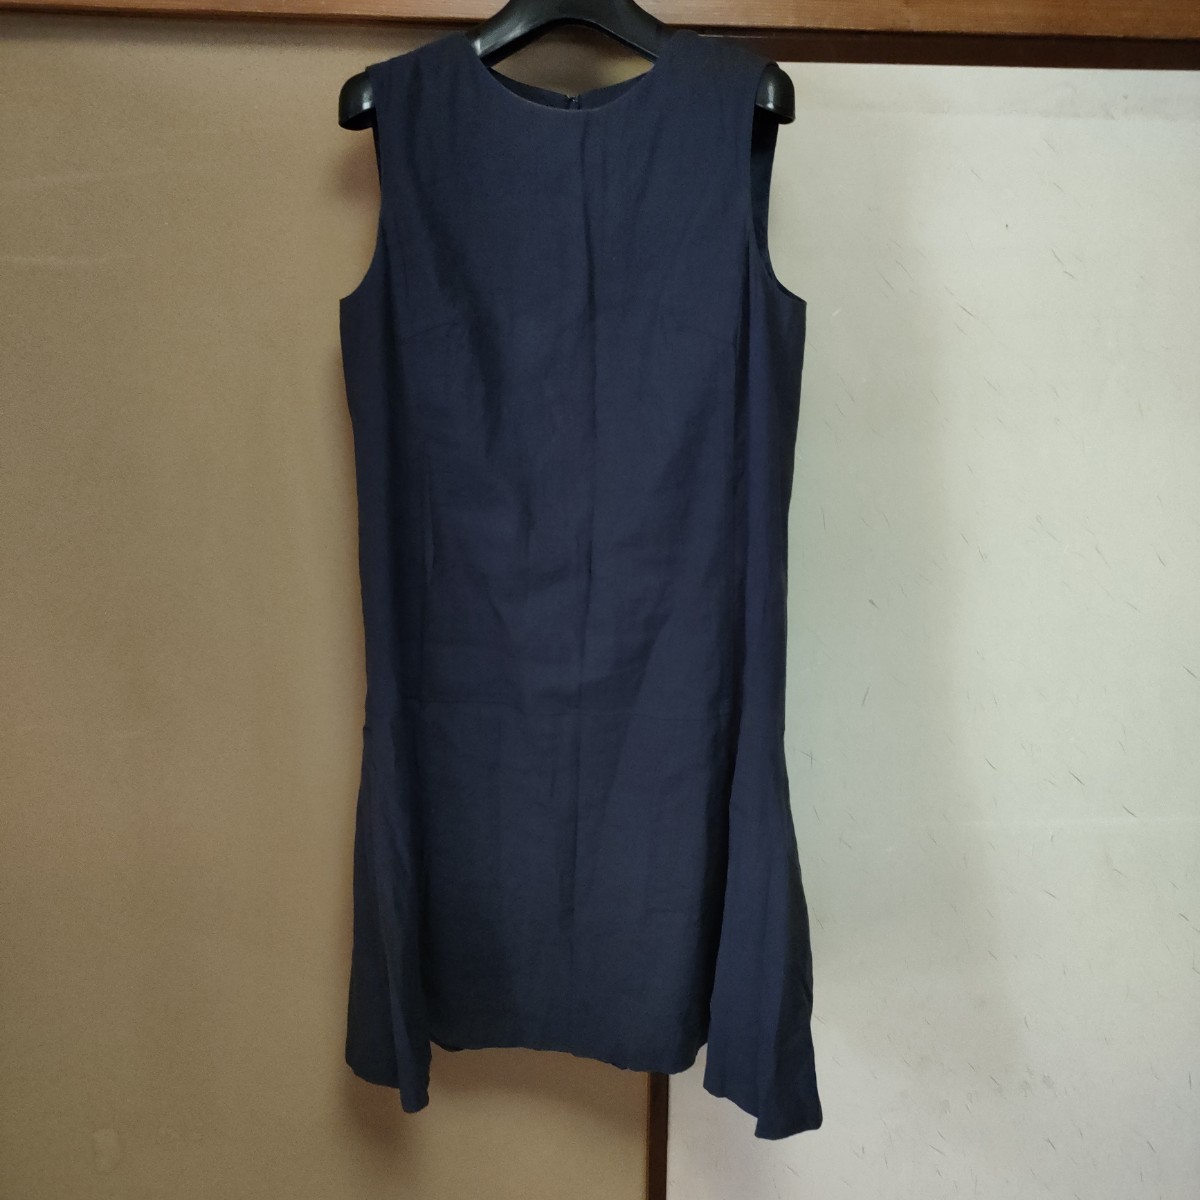 UNTITLED no sleeve flair One-piece / navy blue navy / size 3